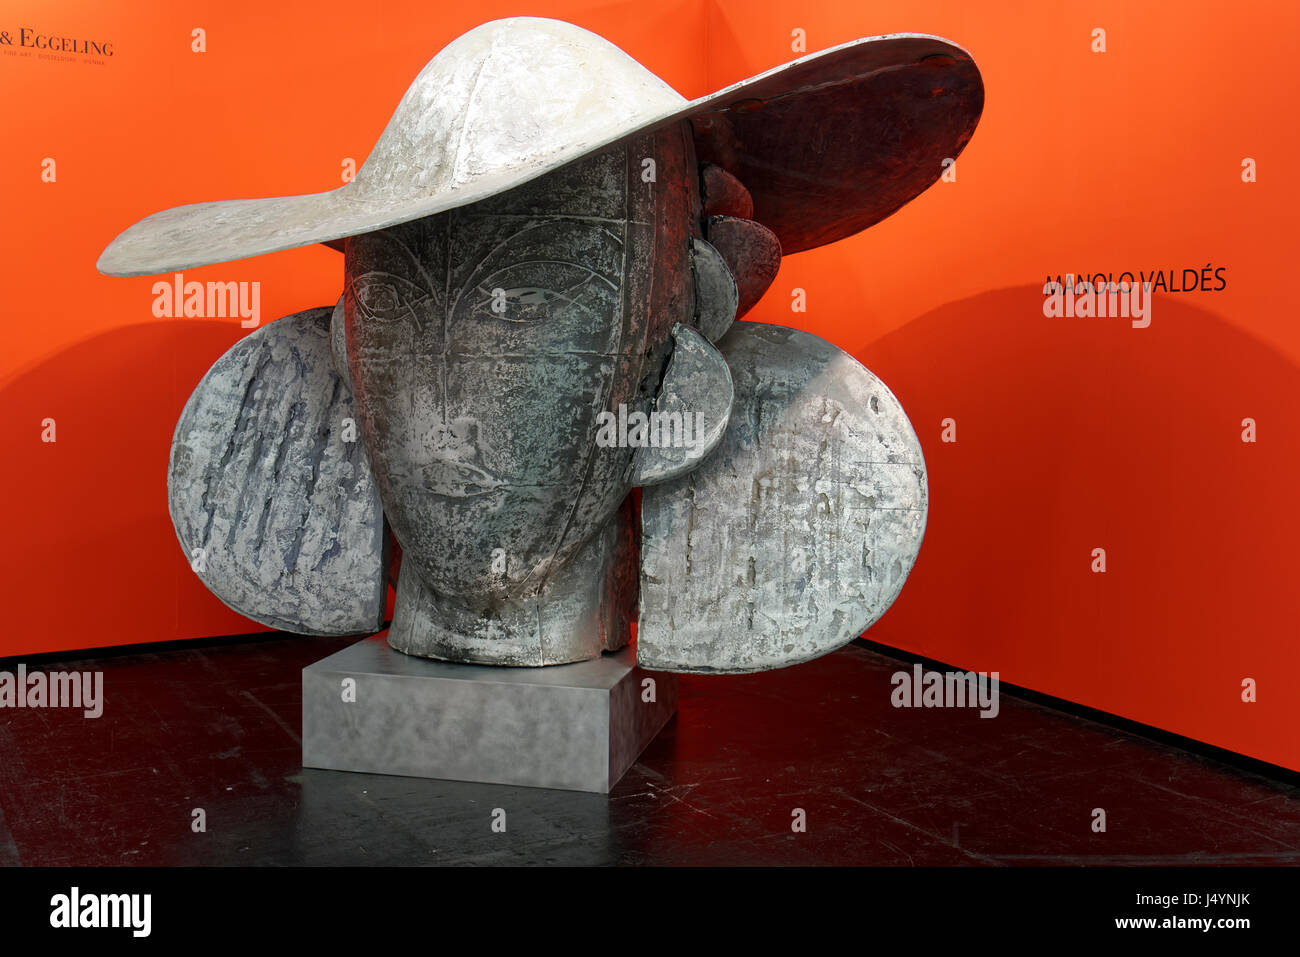 The aluminum sculpture by the artist Manolo Valdés was available for 1 Mio € at Art Cologne 2017. Stock Photo